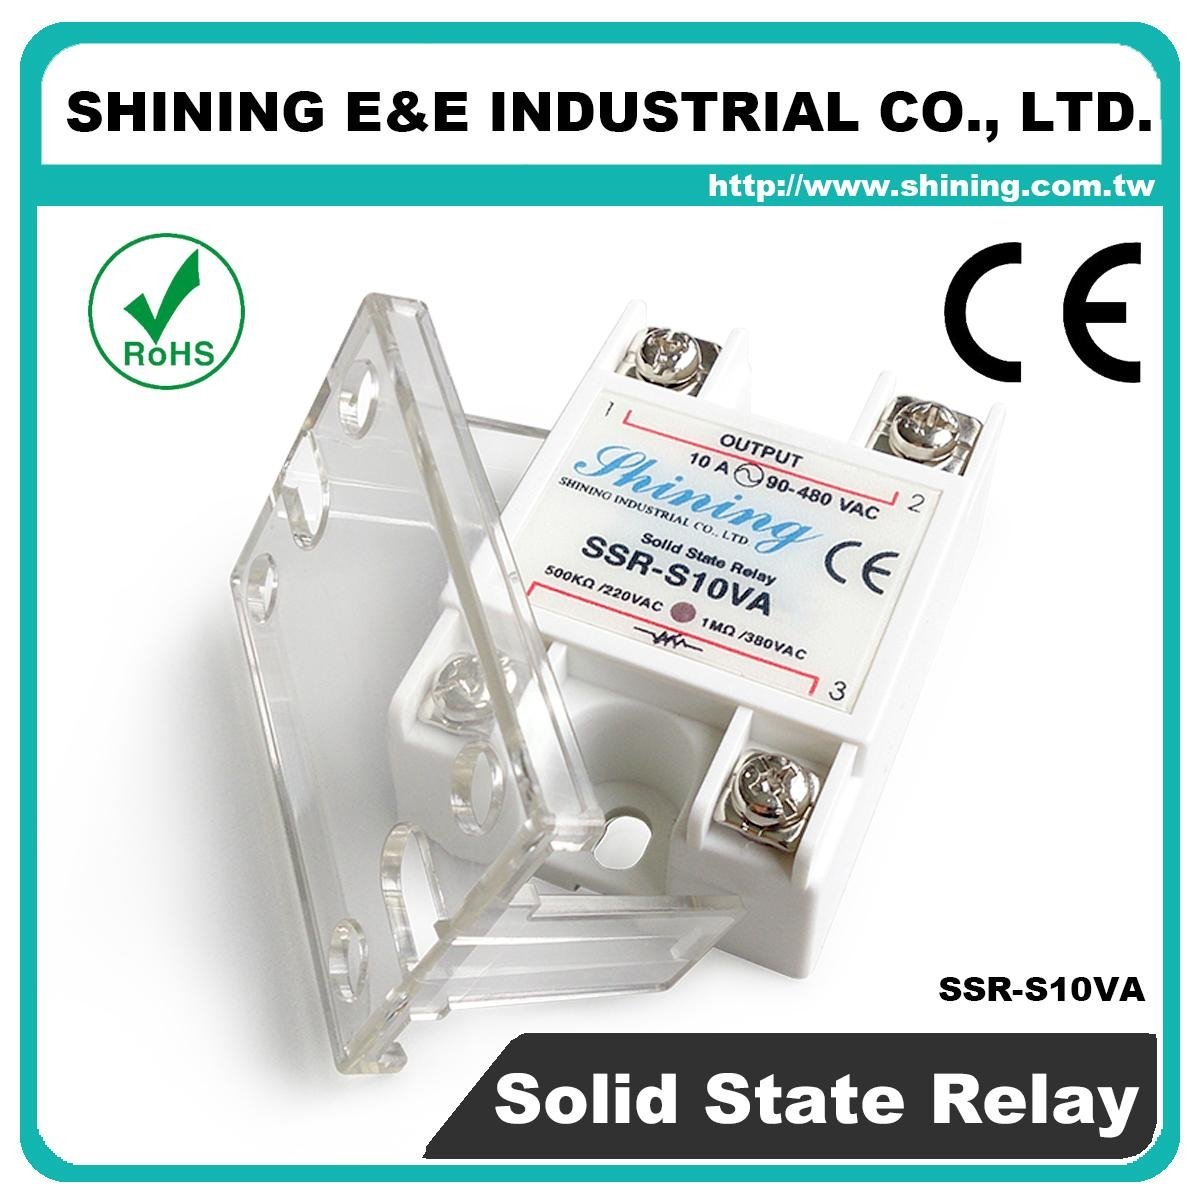 SSR-S10VA Variable Resistor to AC Phase Control Solid State Relay 2